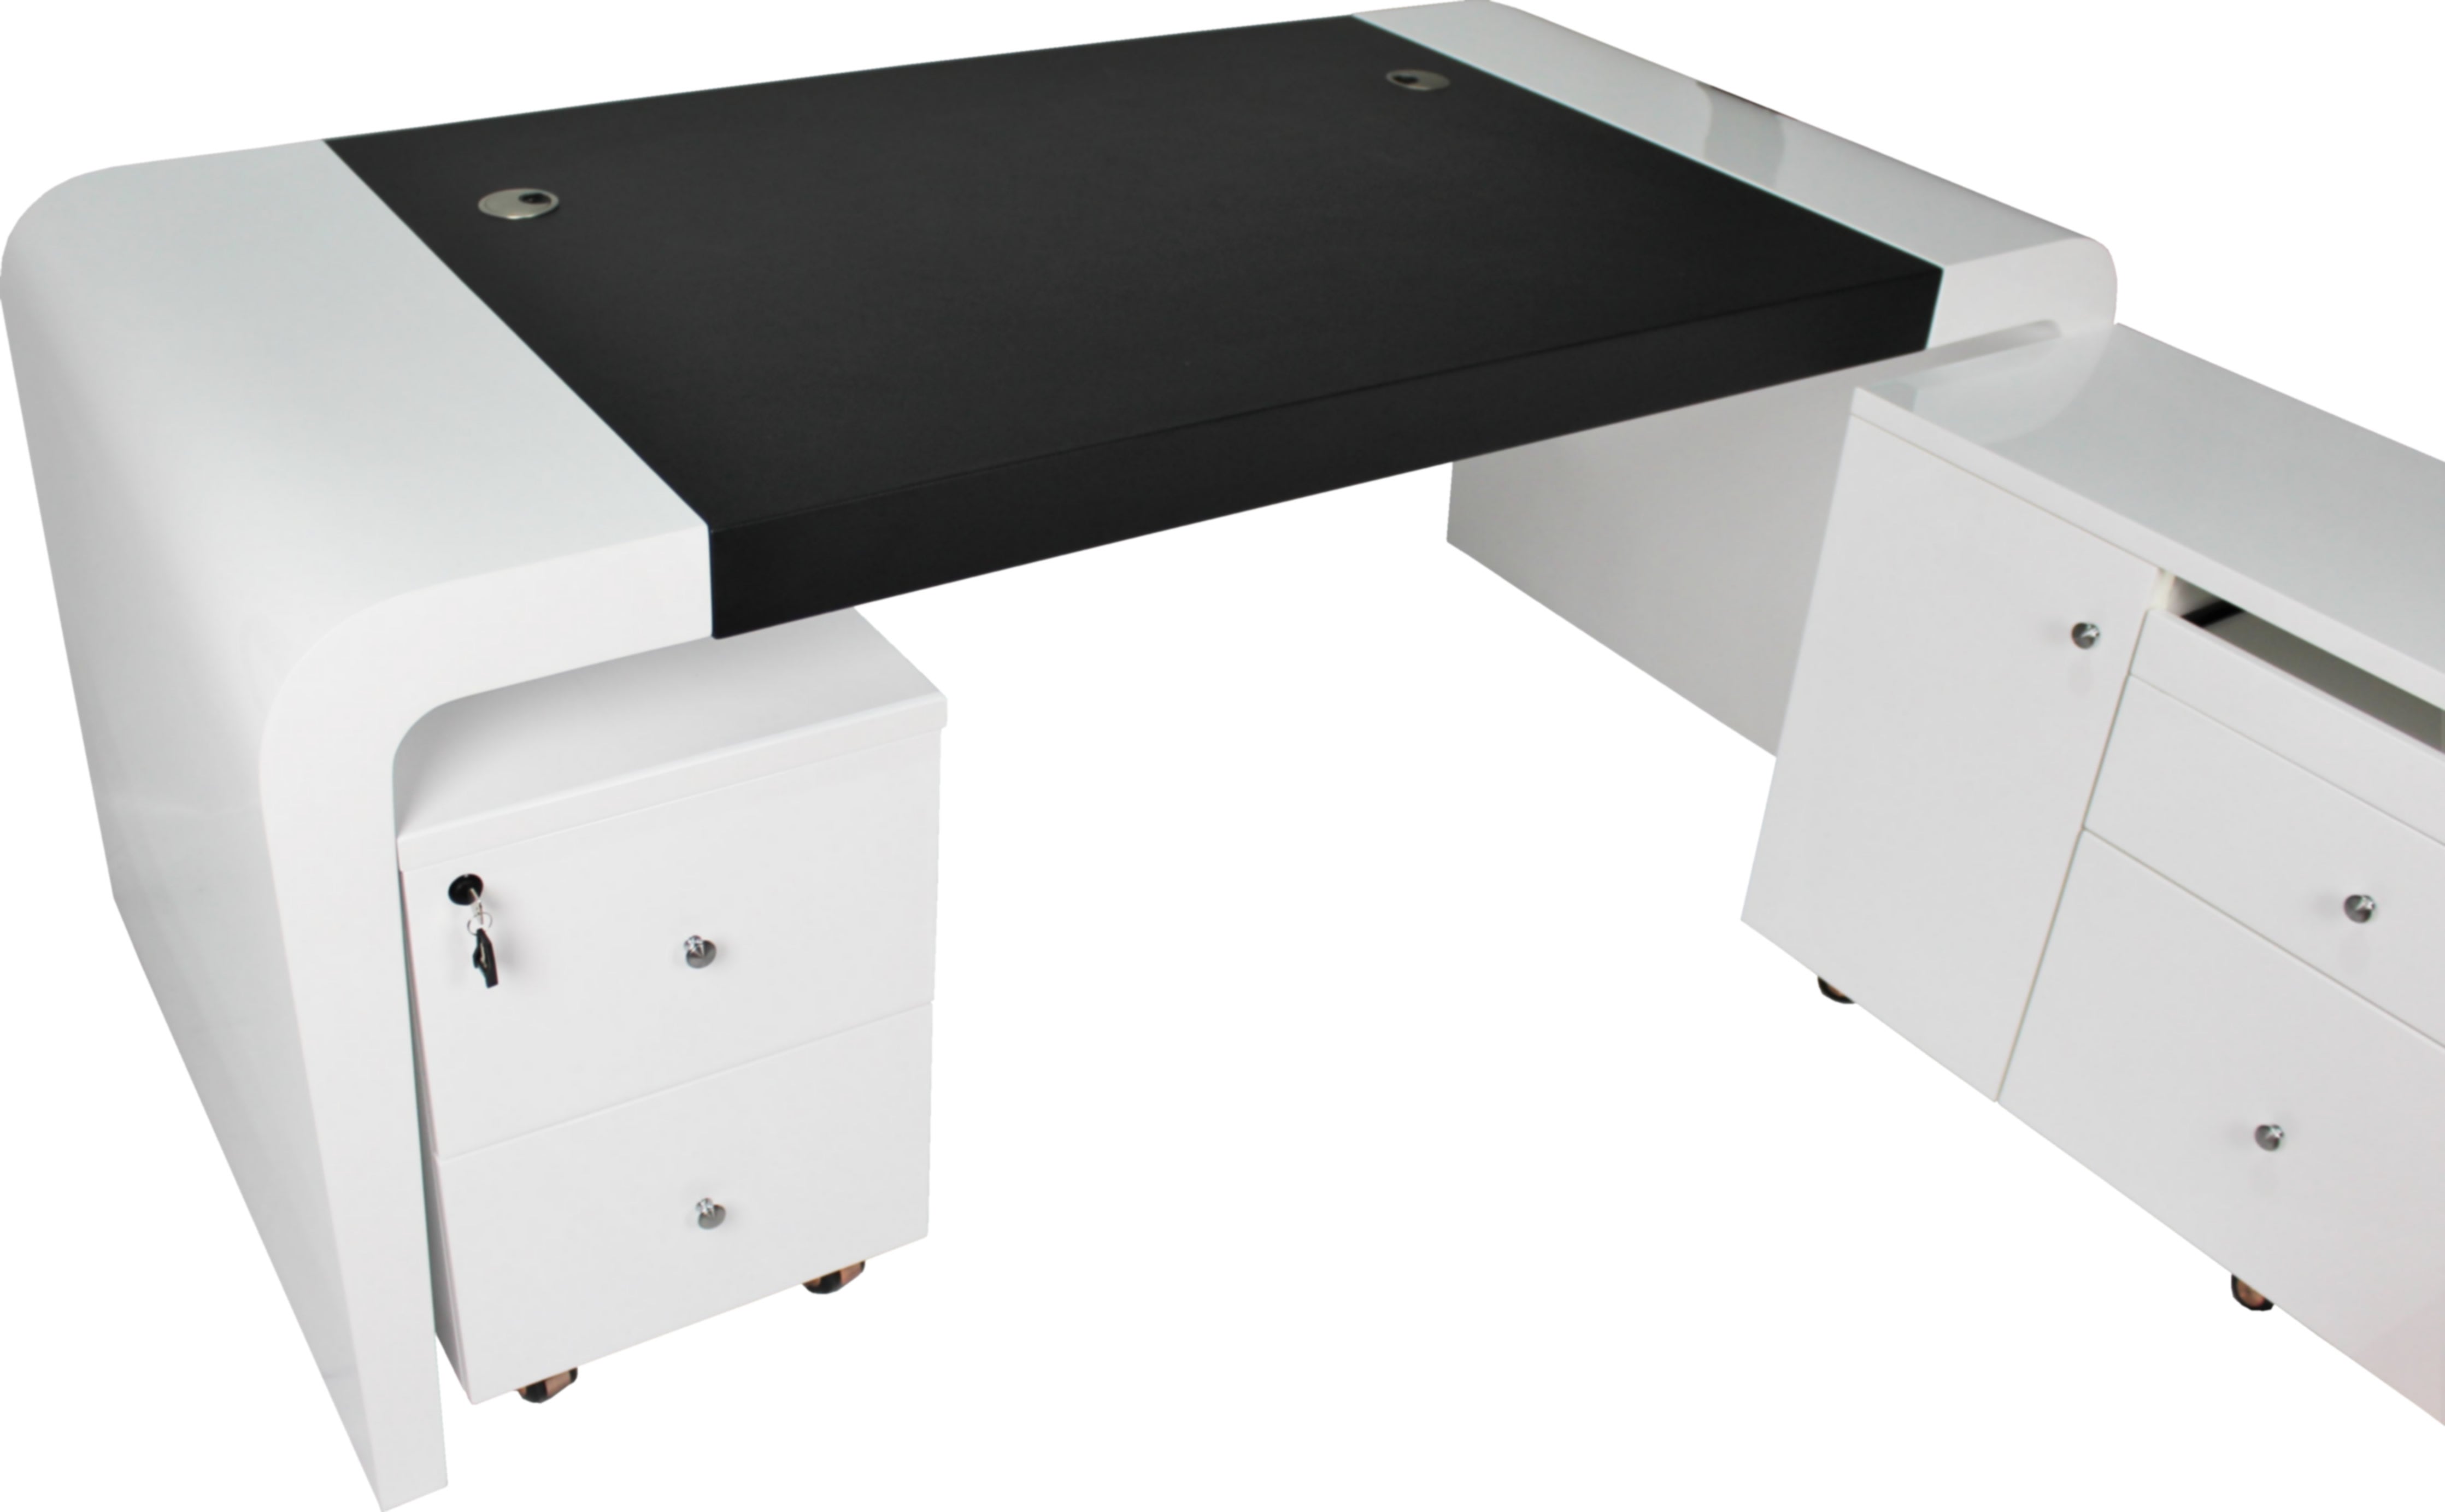 Prosparae T1381-1.8 Gloss White Executive Desk with Pedestal and Return